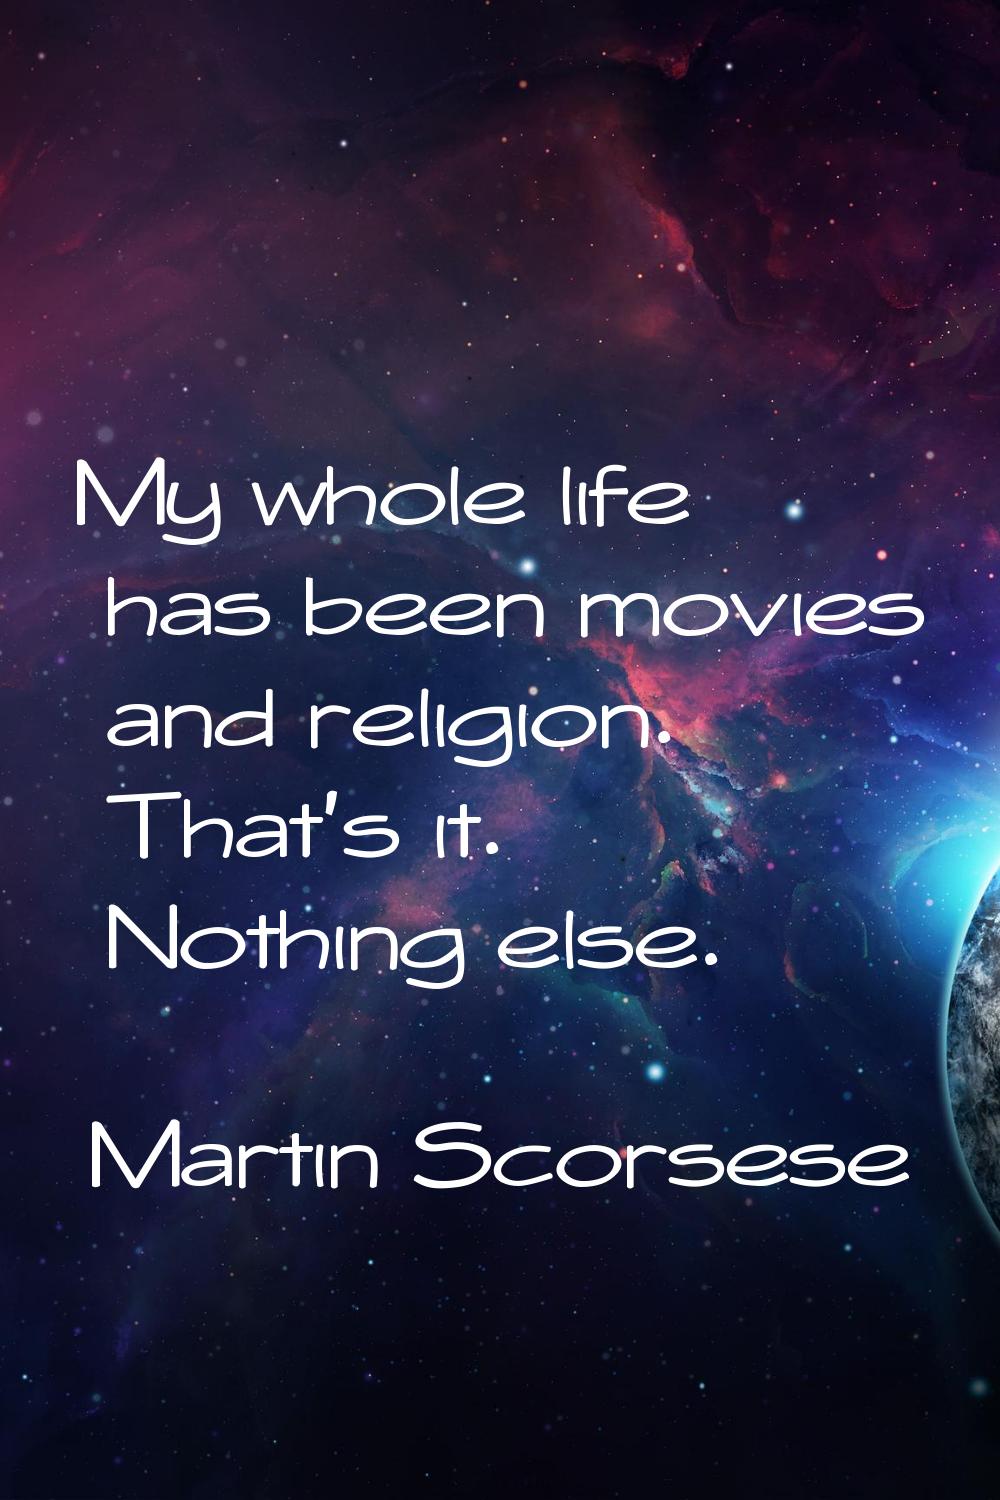 My whole life has been movies and religion. That's it. Nothing else.